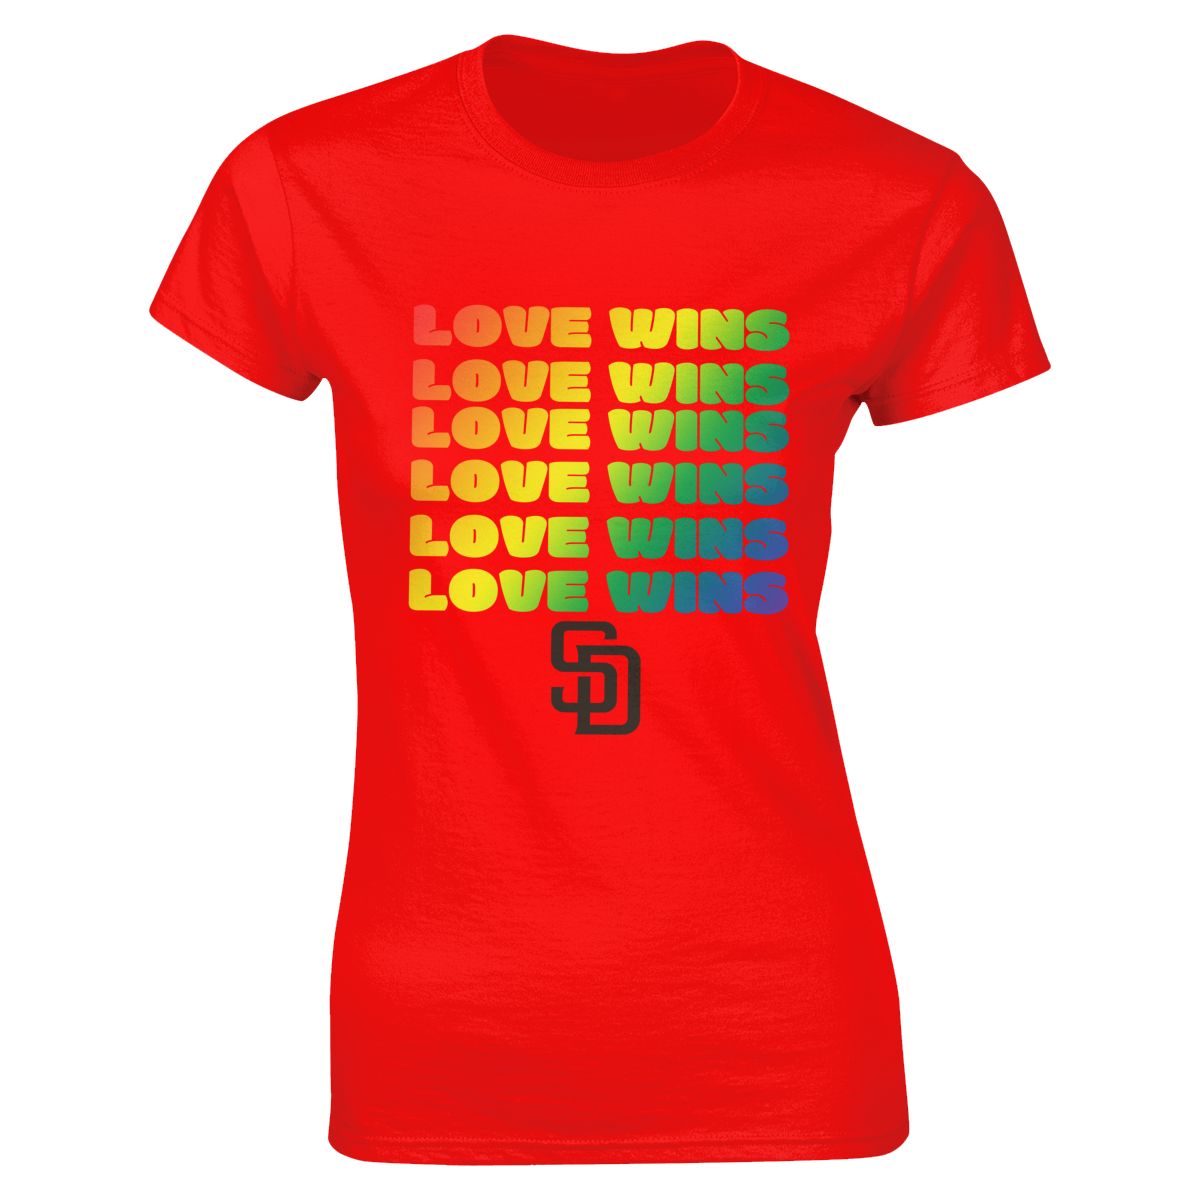 San Diego Padres Love Wins Pride Women's Classic-Fit T-Shirt